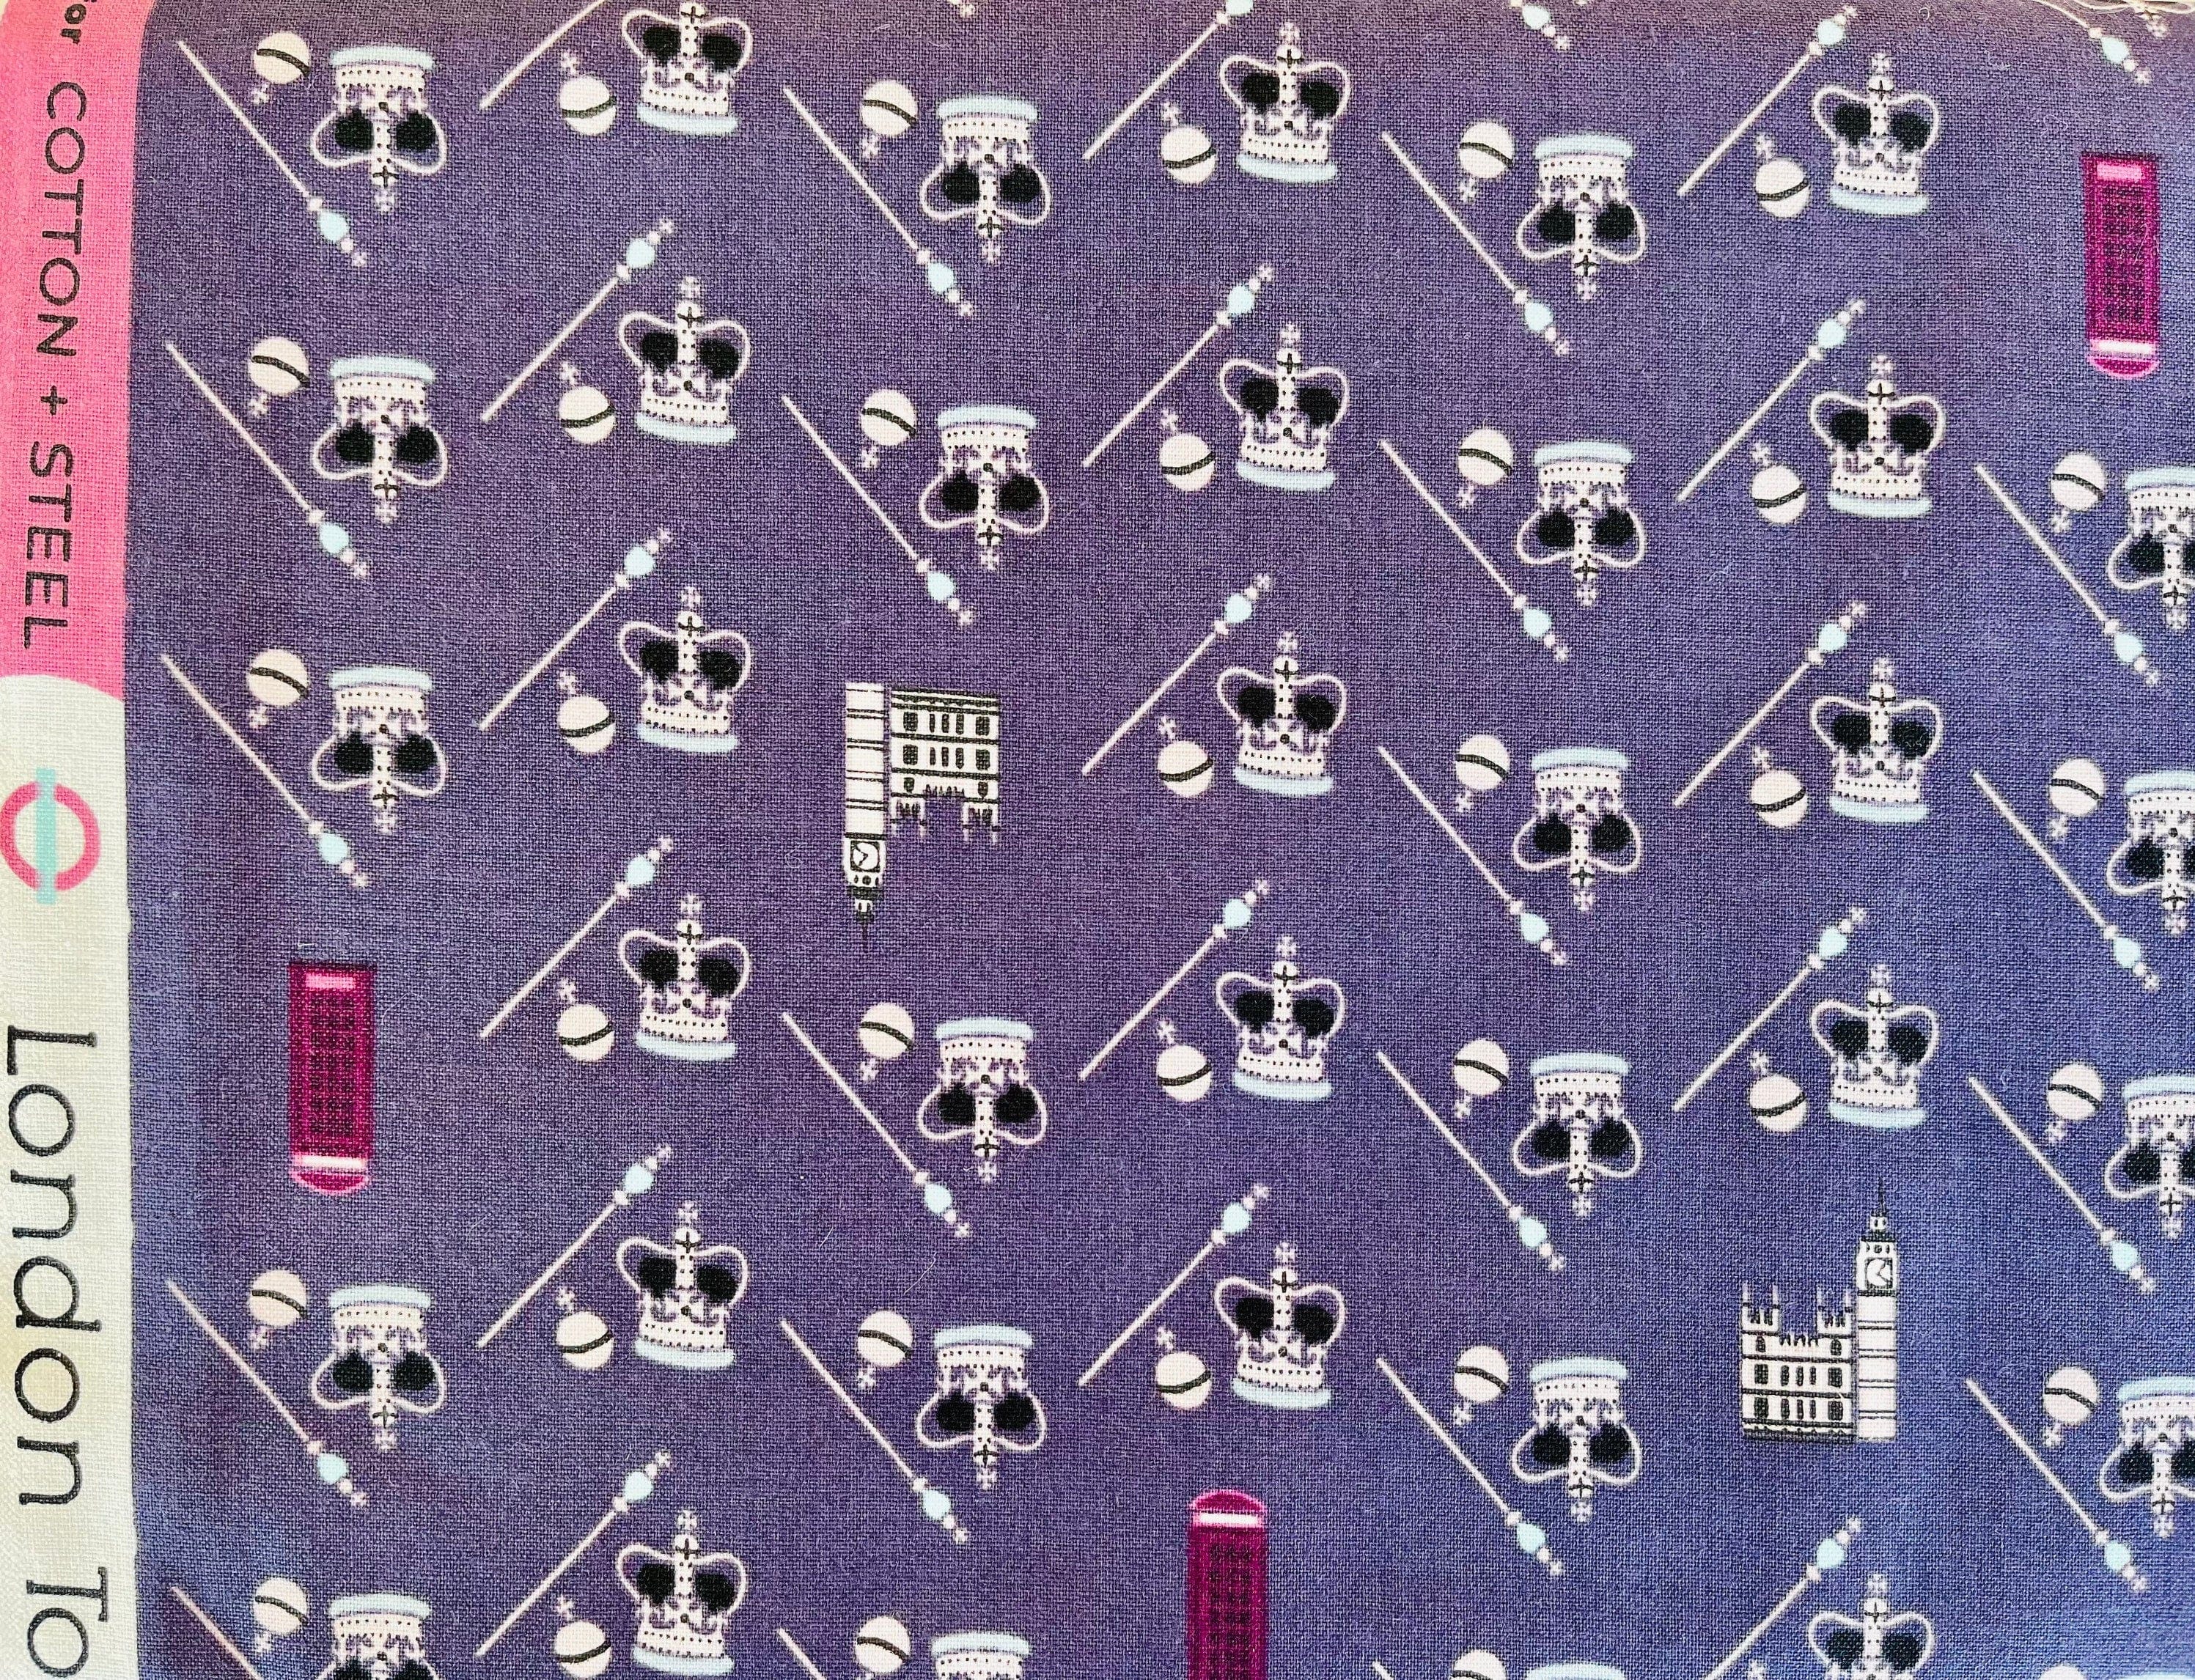 London Town HRH - Royal Purple Fabric- Sara Mulvanny - Cotton + Steel - Purple - Red - Blue - Quilting Cotton - SY104-RP3